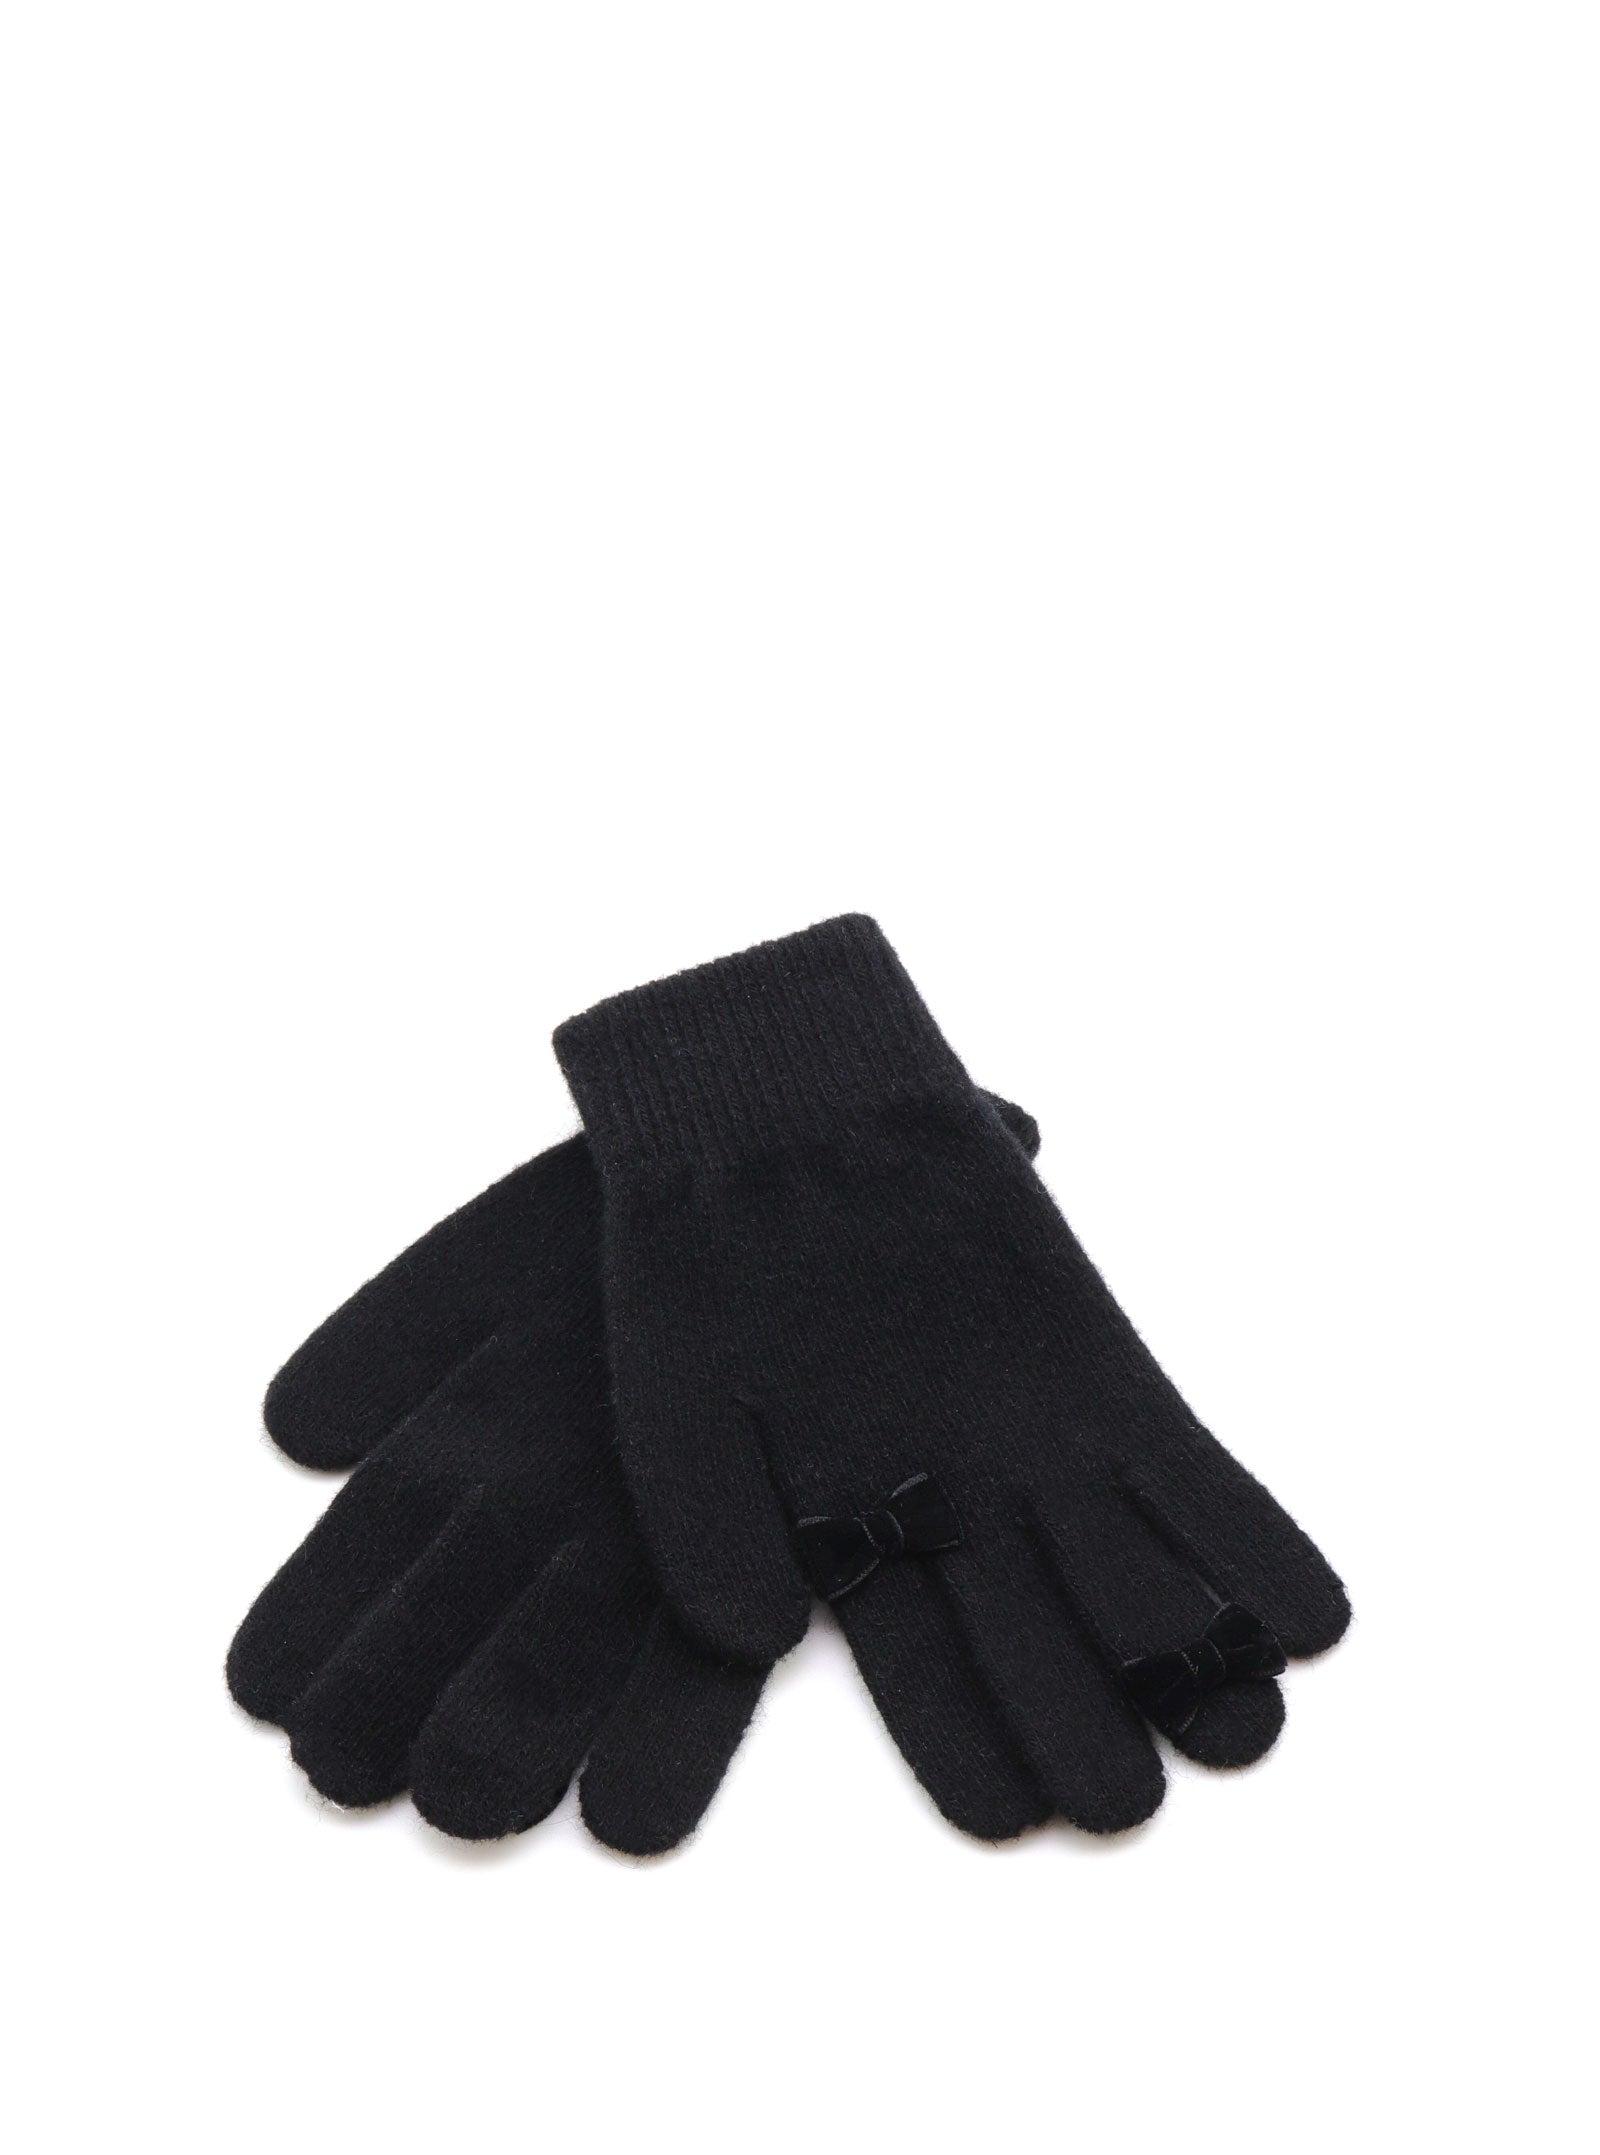 POMARE WOOL KNIT GLOVES